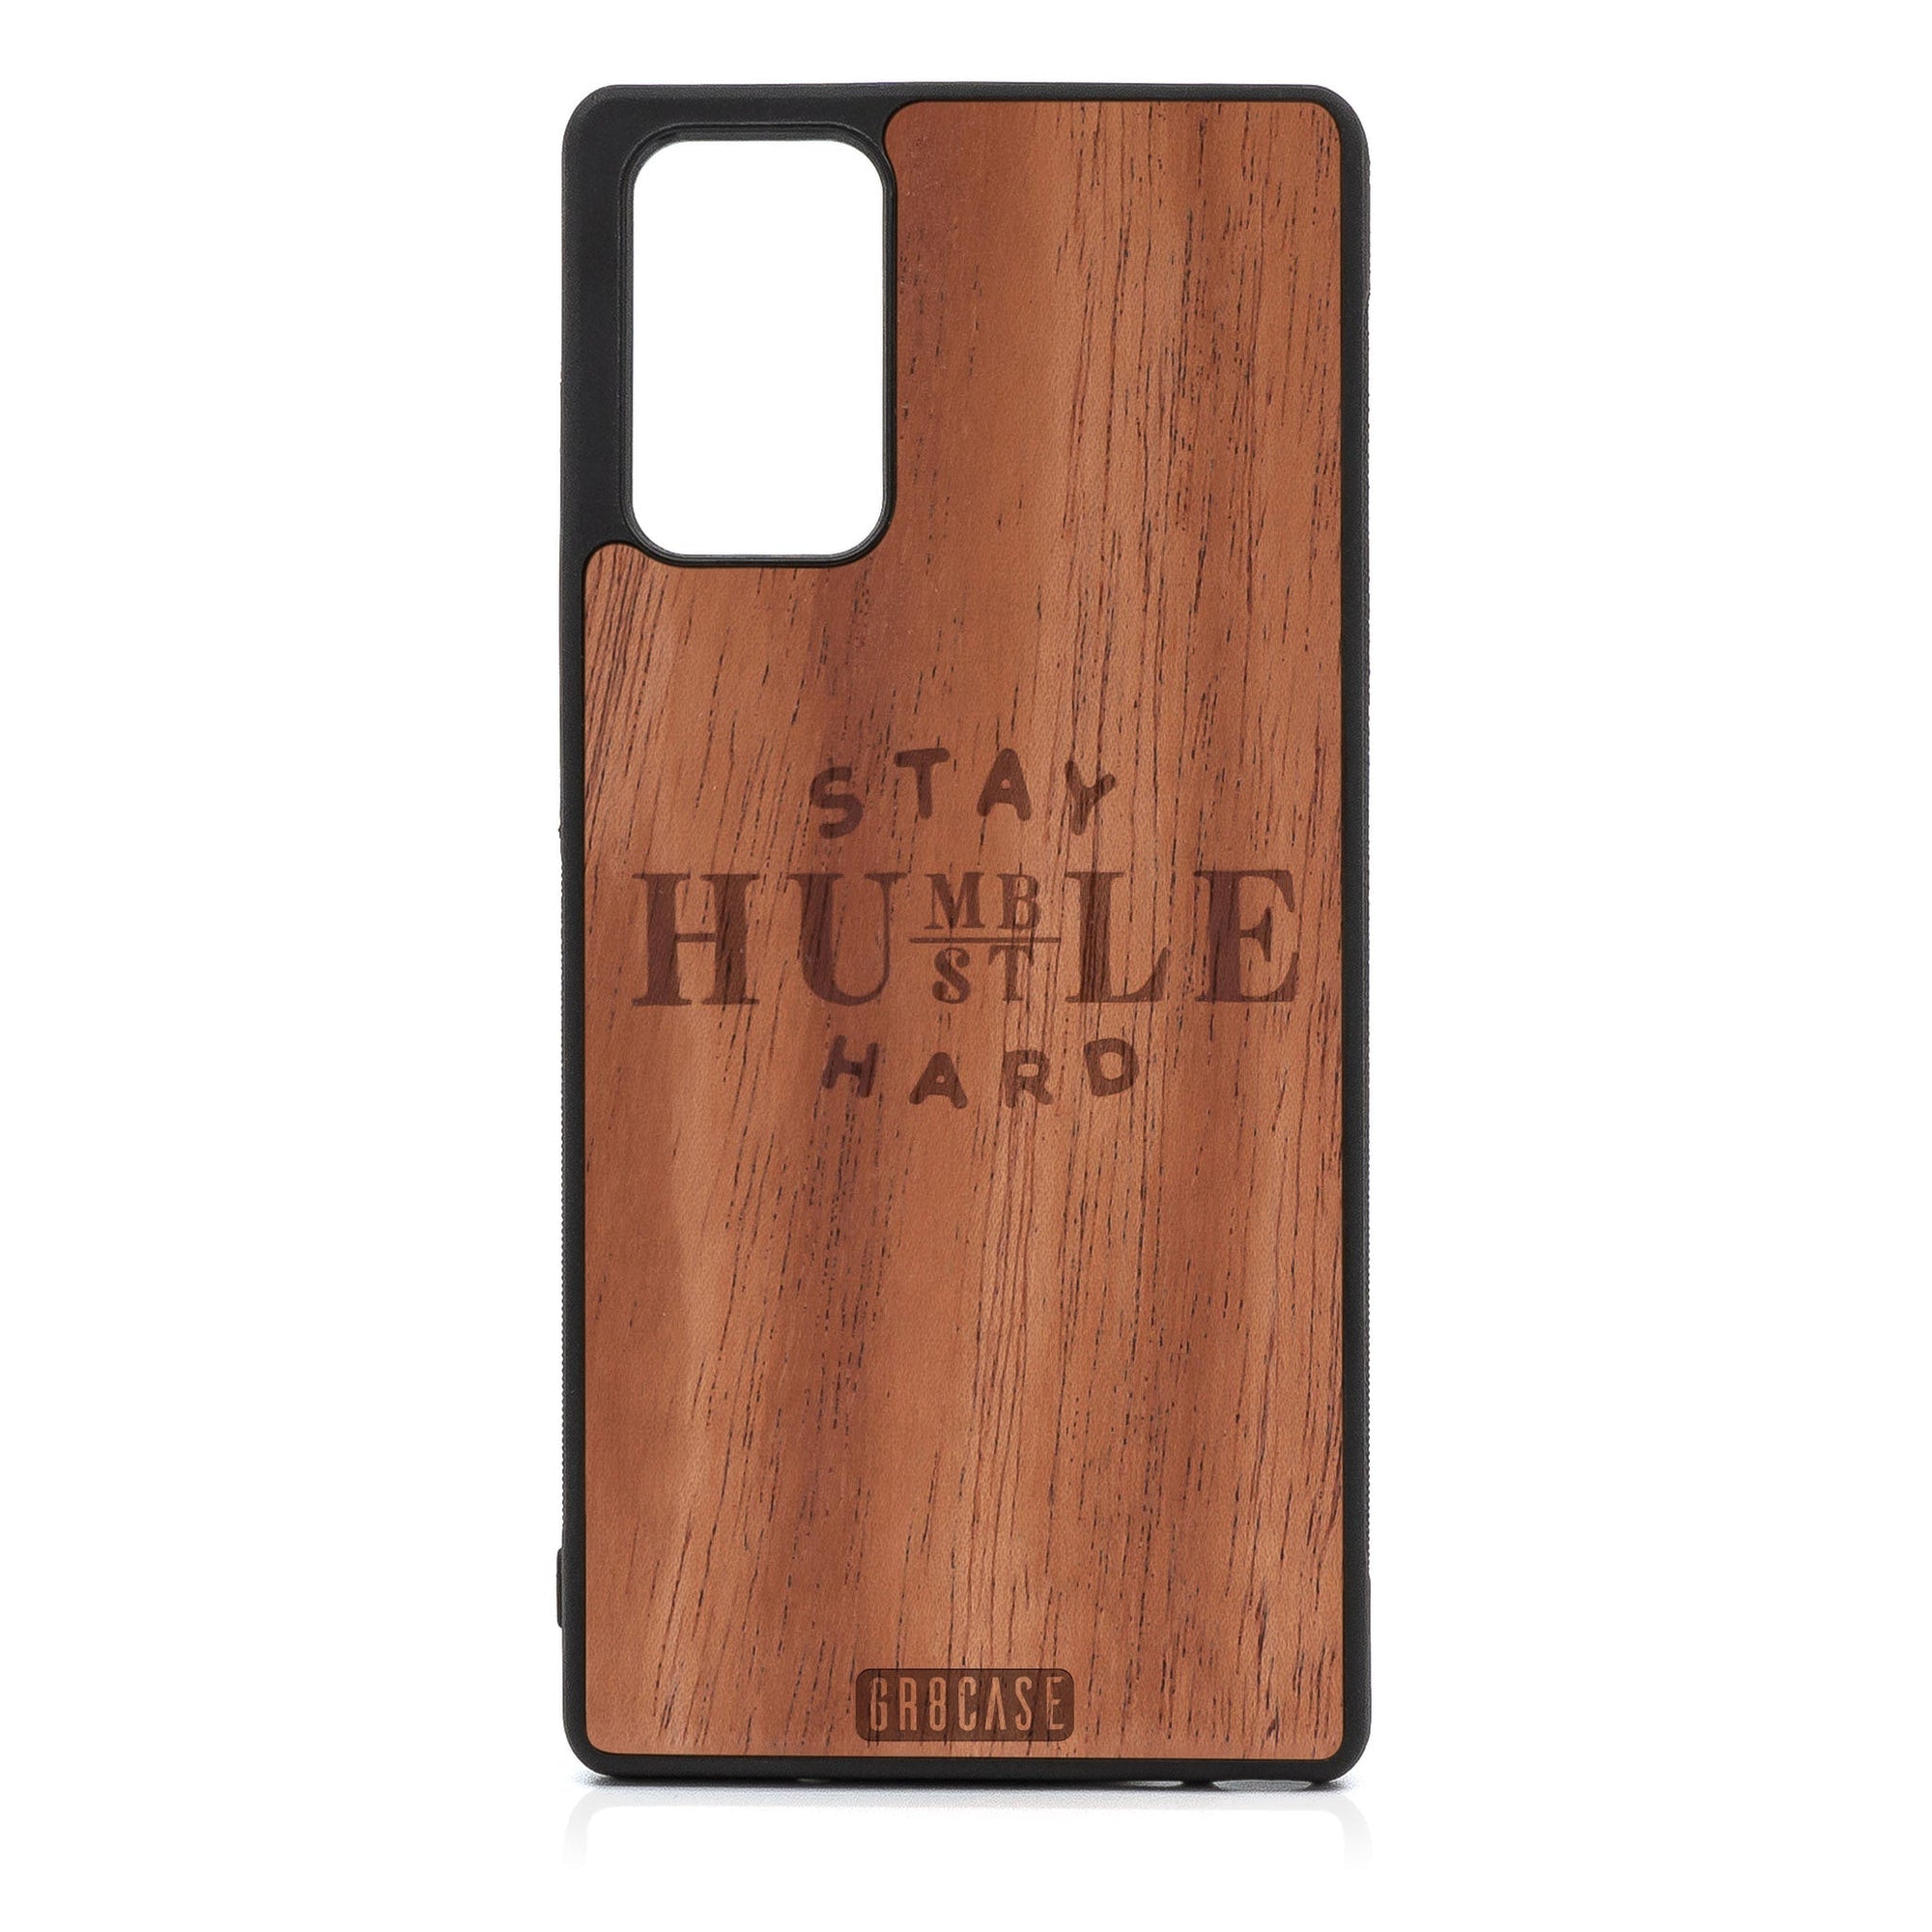 Stay Humble Hustle Hard Design Wood Case For Samsung Galaxy A72 5G